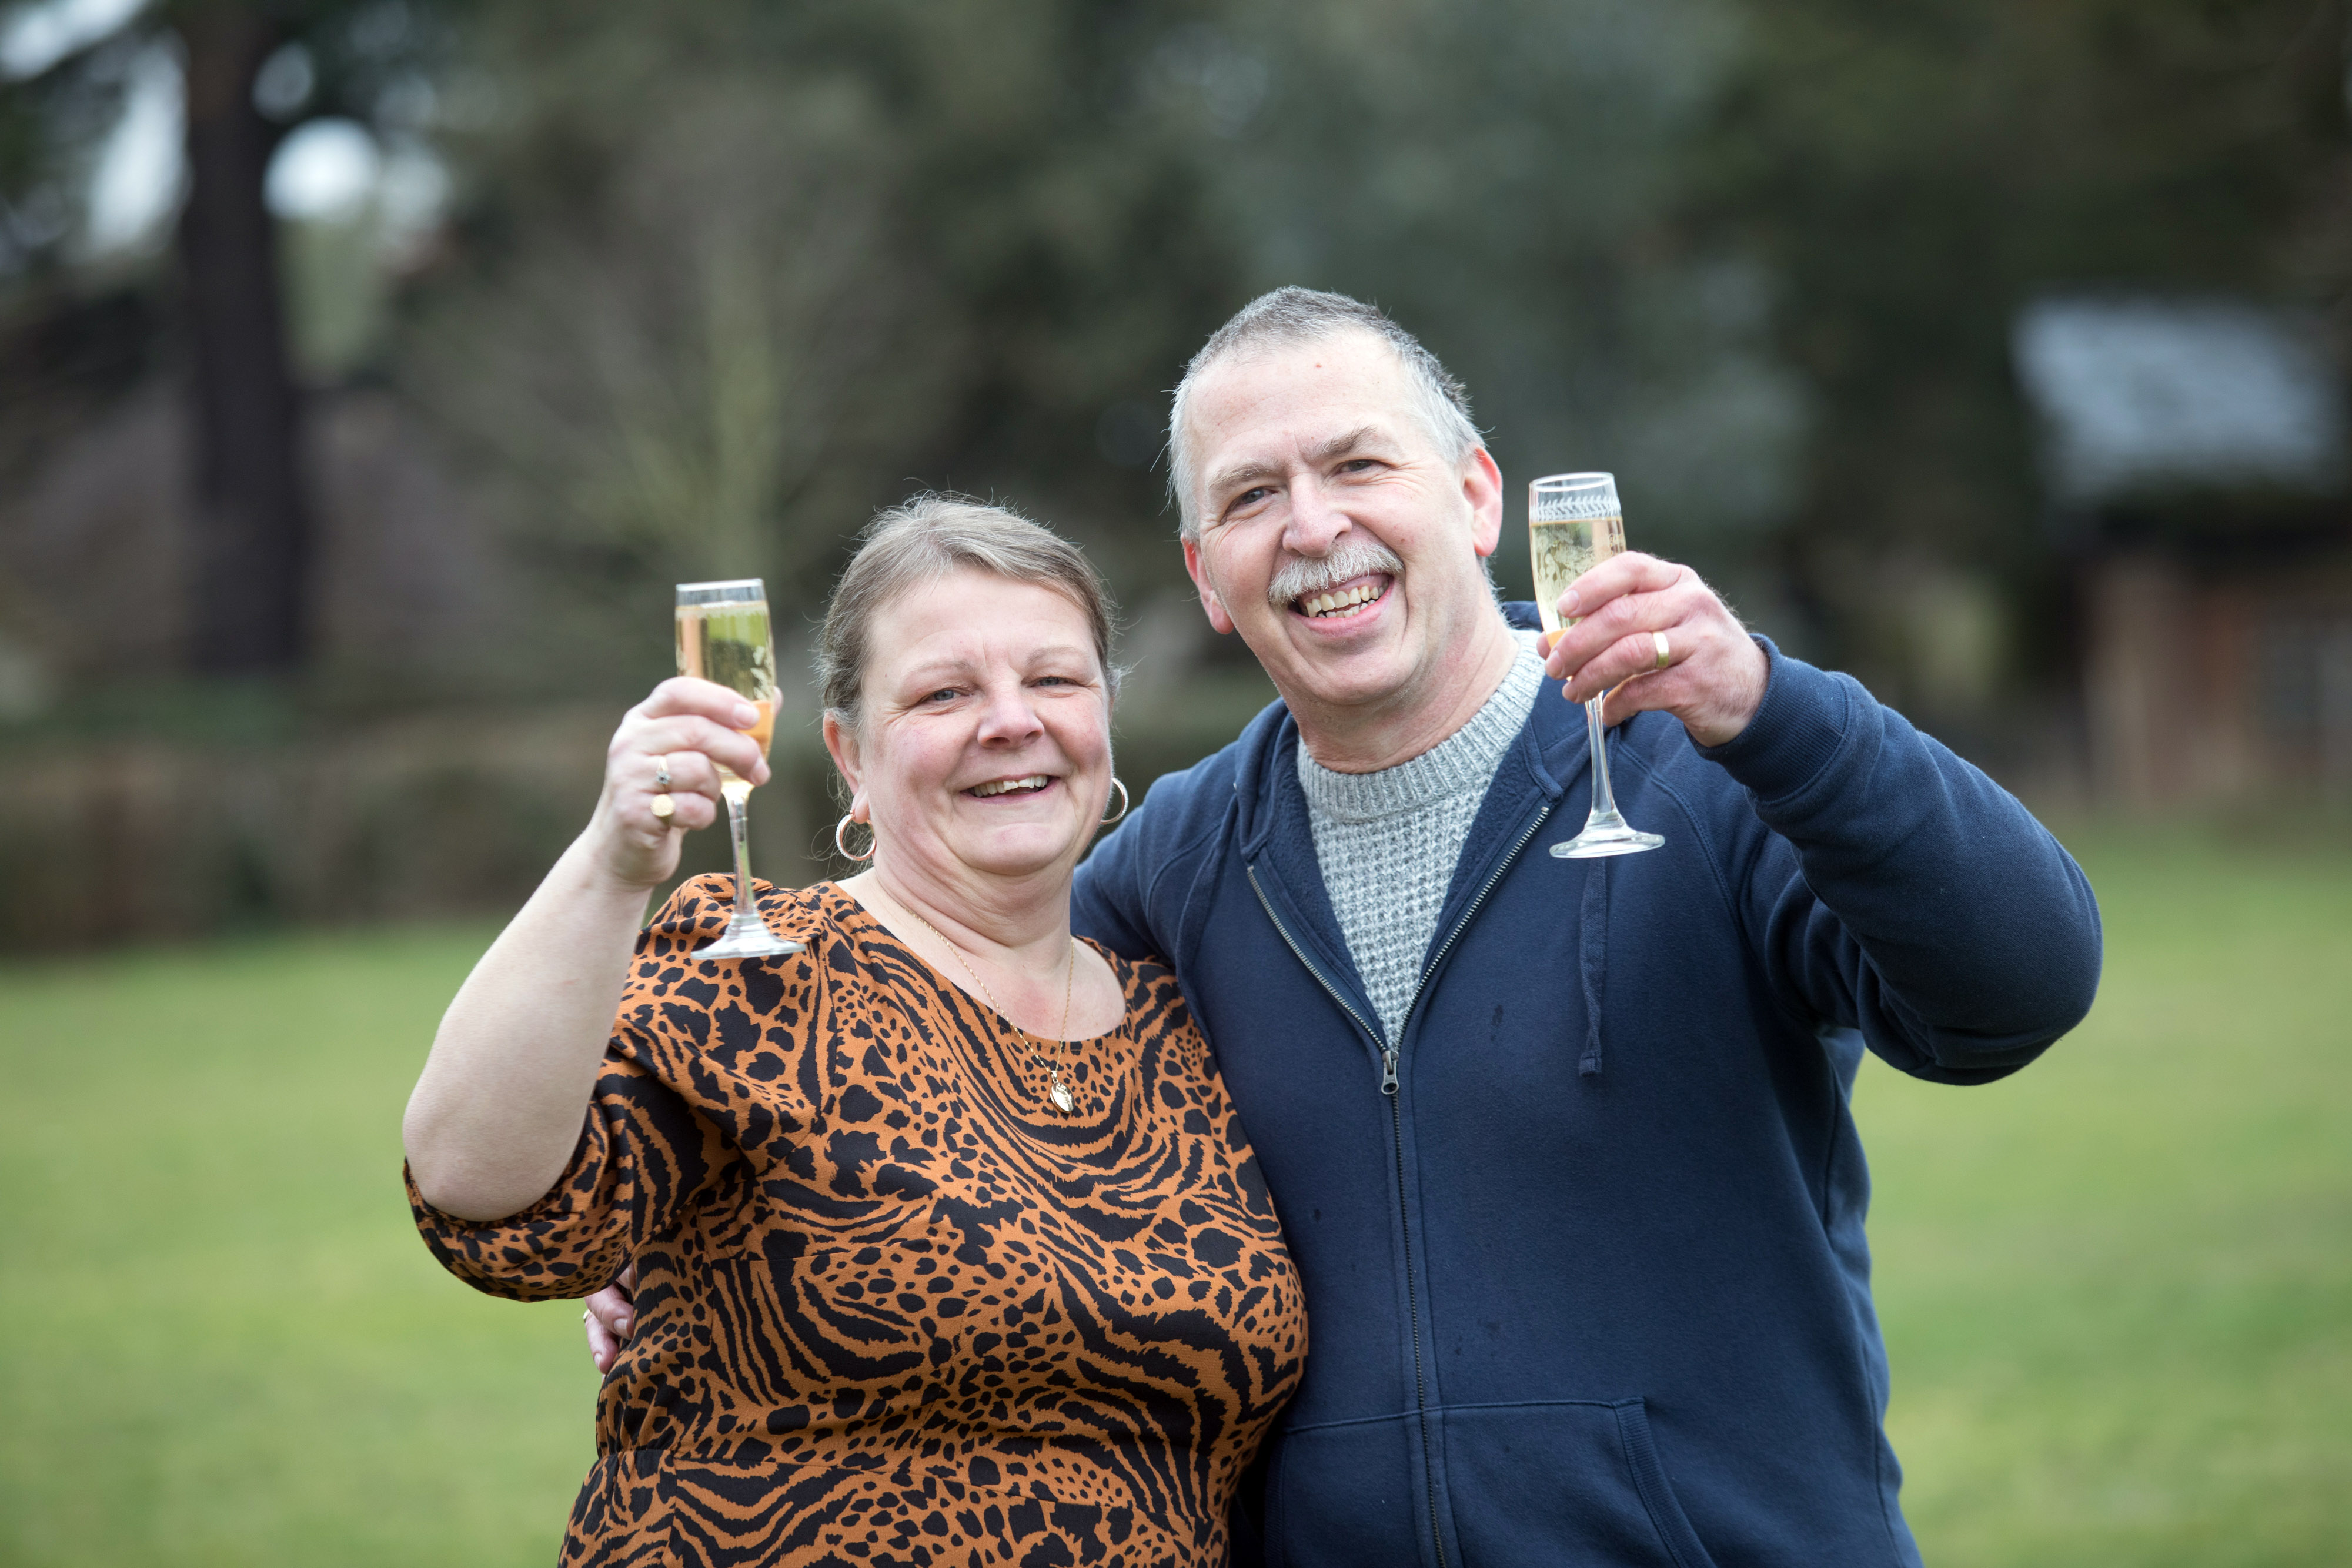 Karen and Jeff Dakin plan to take their teenage son Callum on his first ever holiday following their lottery win. (National Lottery/ PA)